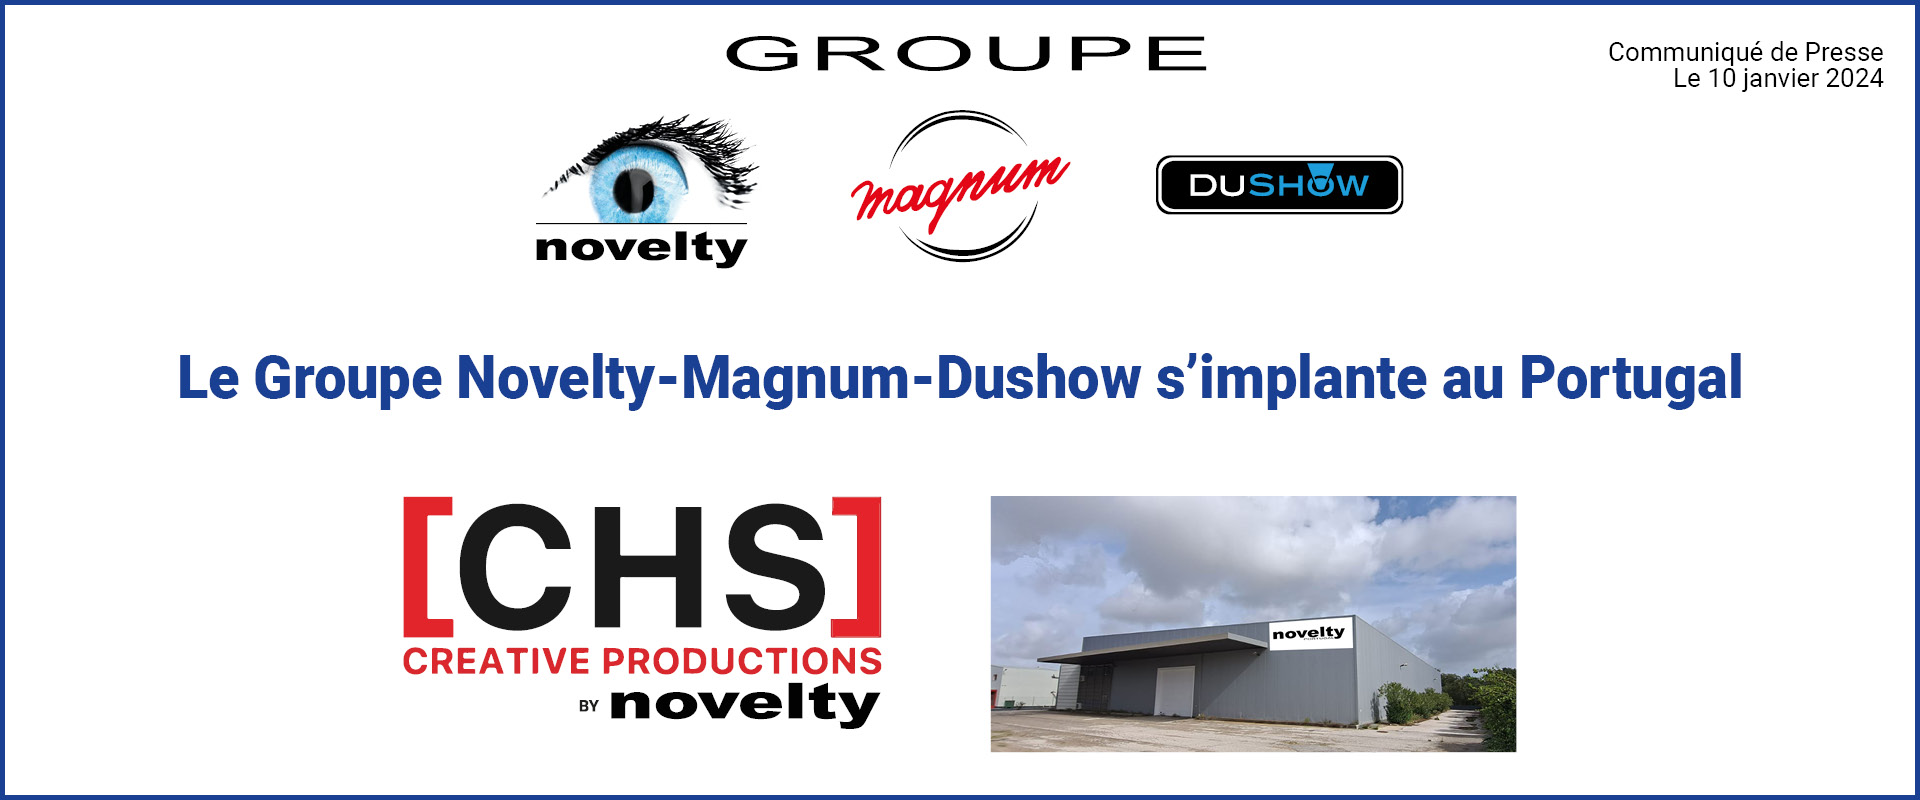 Visuel The Groupe Novelty-Magnum-Dushow is now established in Portugal